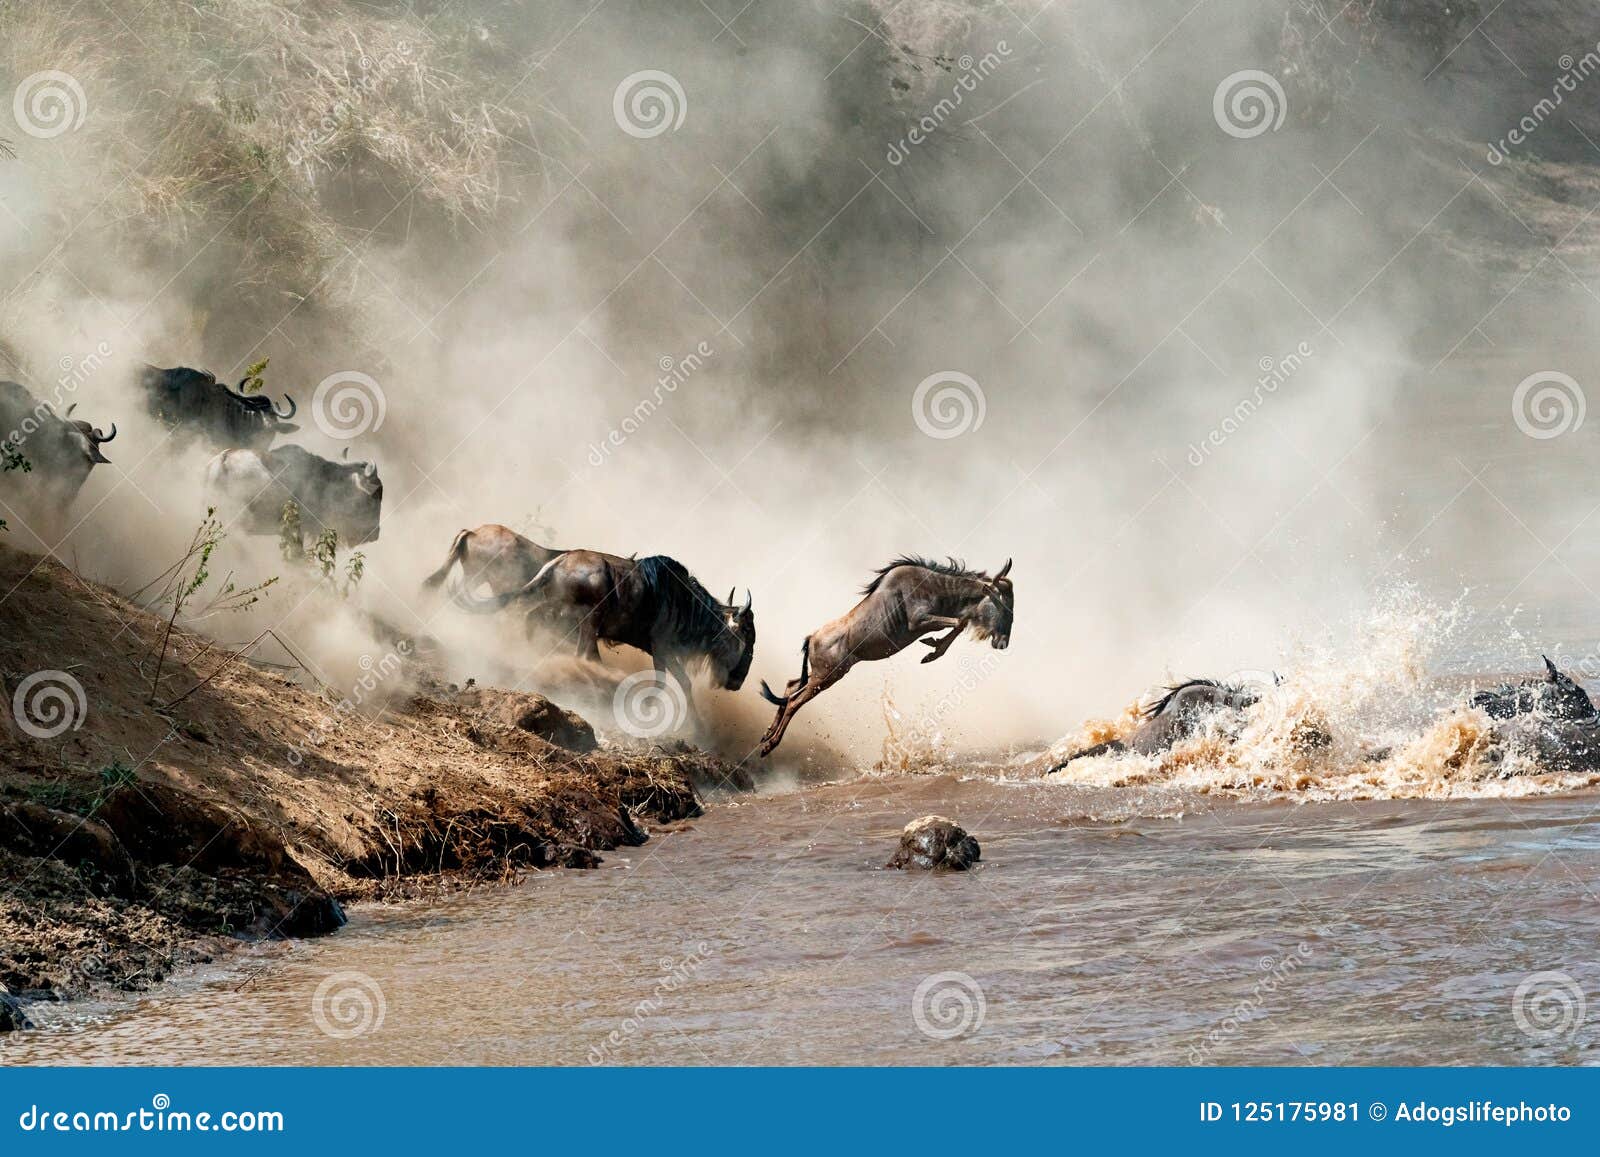 wildebeest leaping in mid-air over mara river